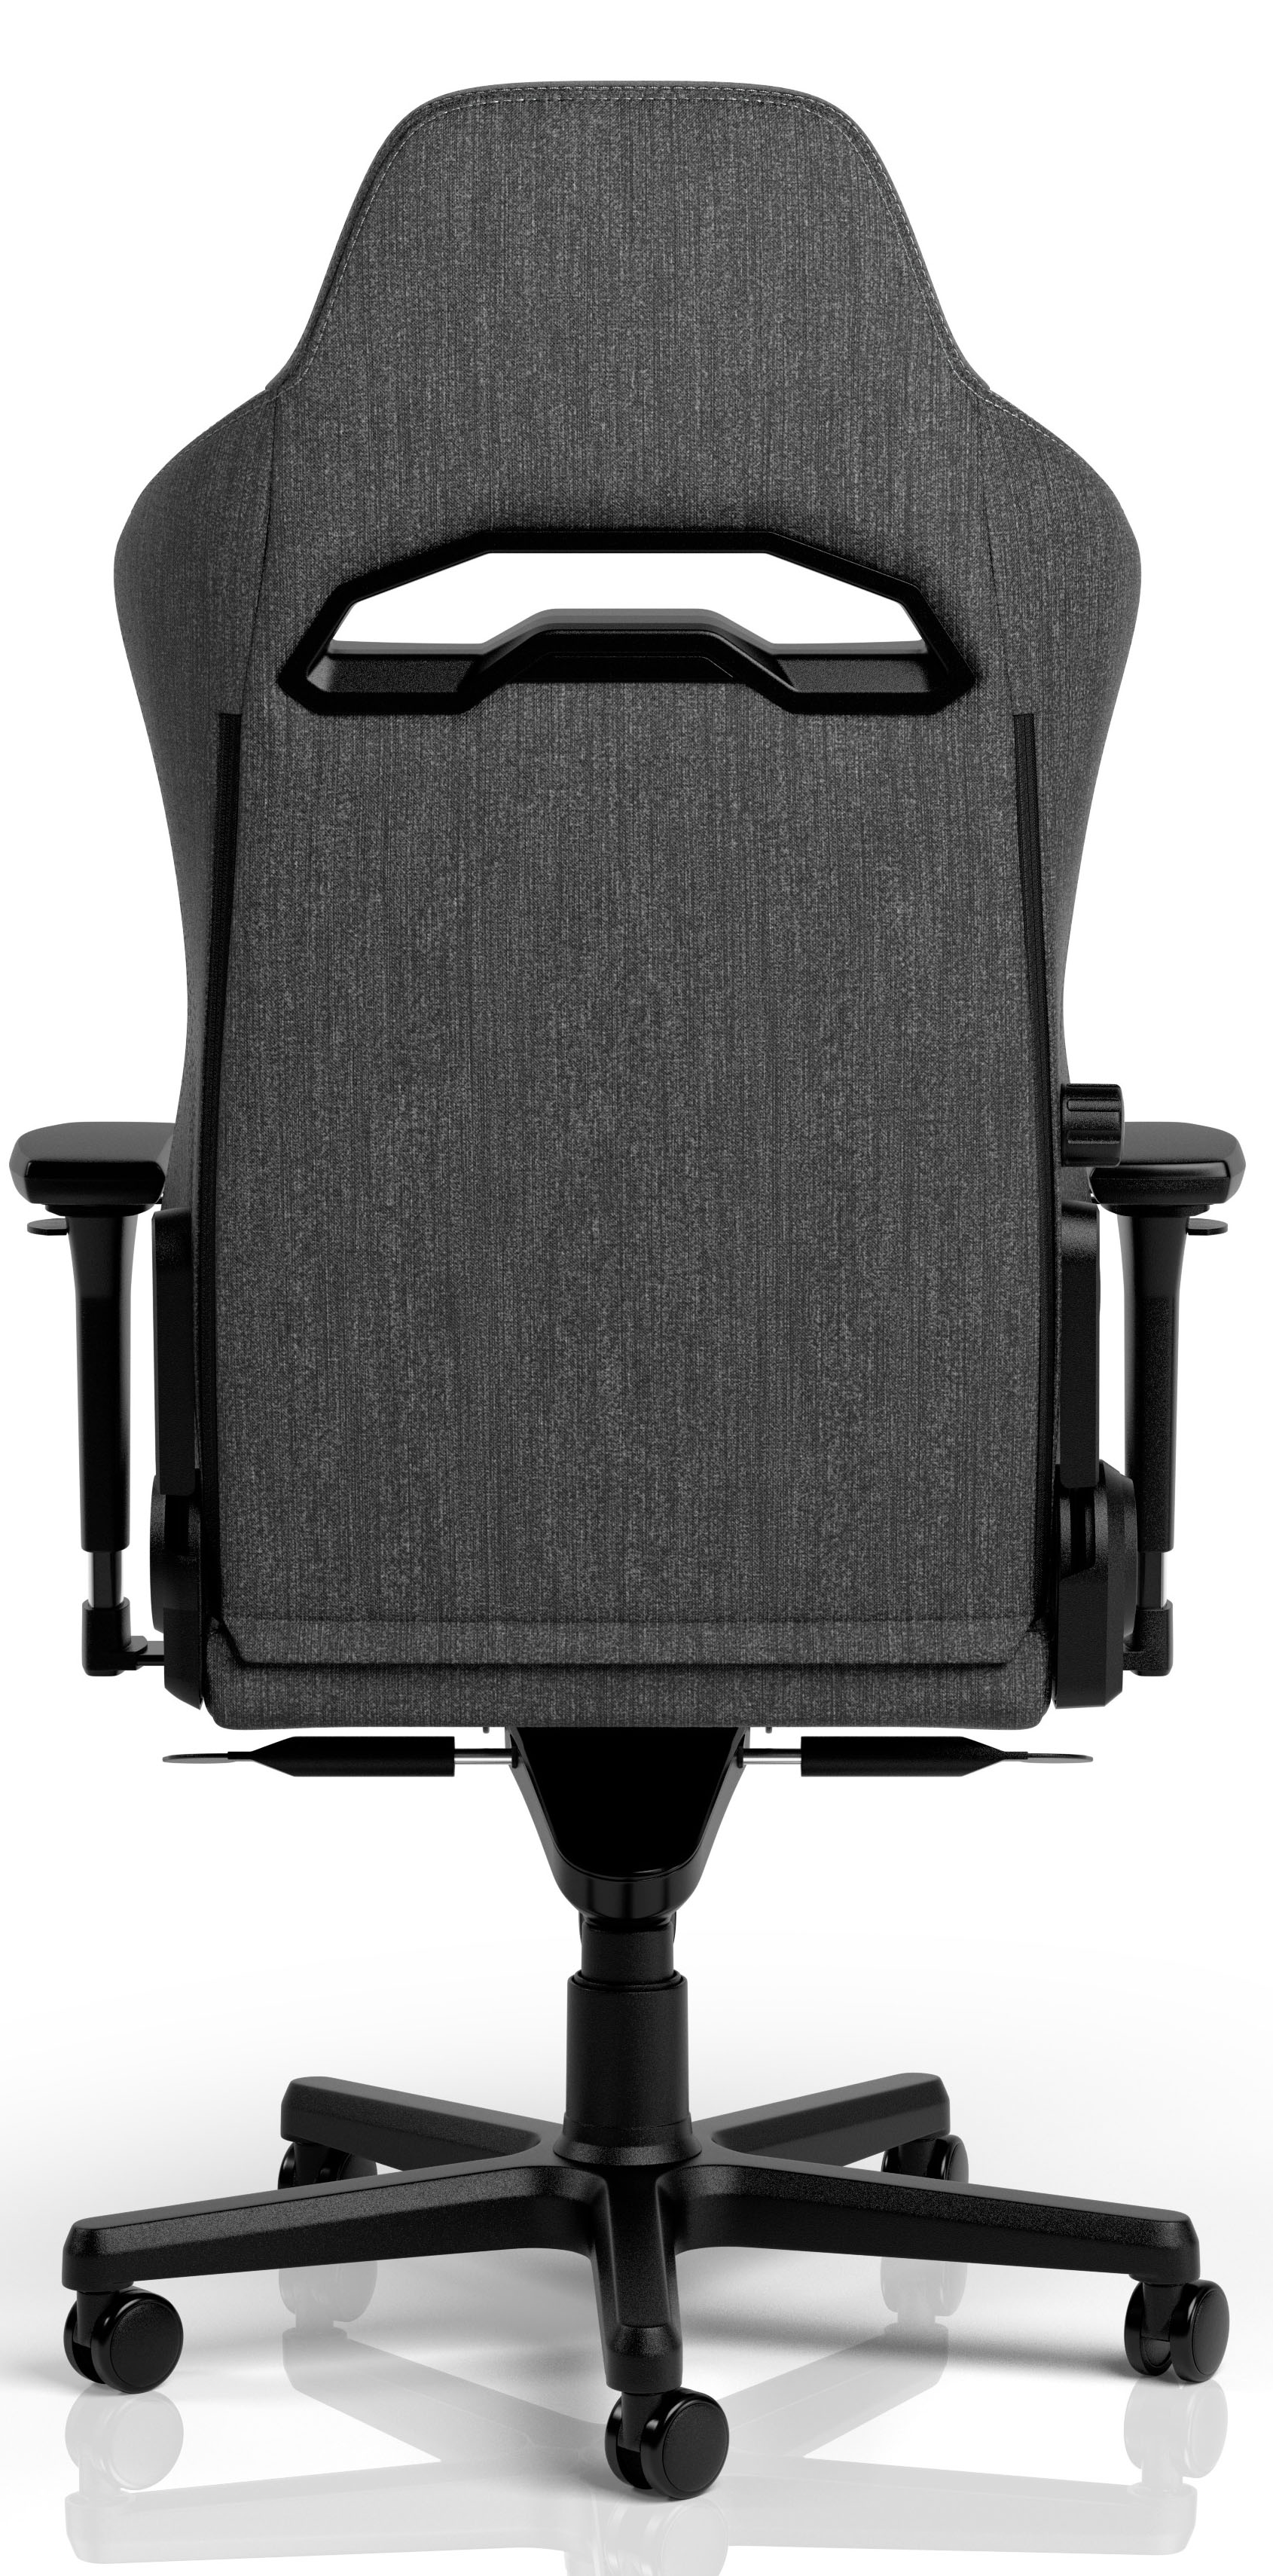 noblechairs - ** B Grade ** Cadeira noblechairs HERO ST TX - Fabric Edition Anthracite